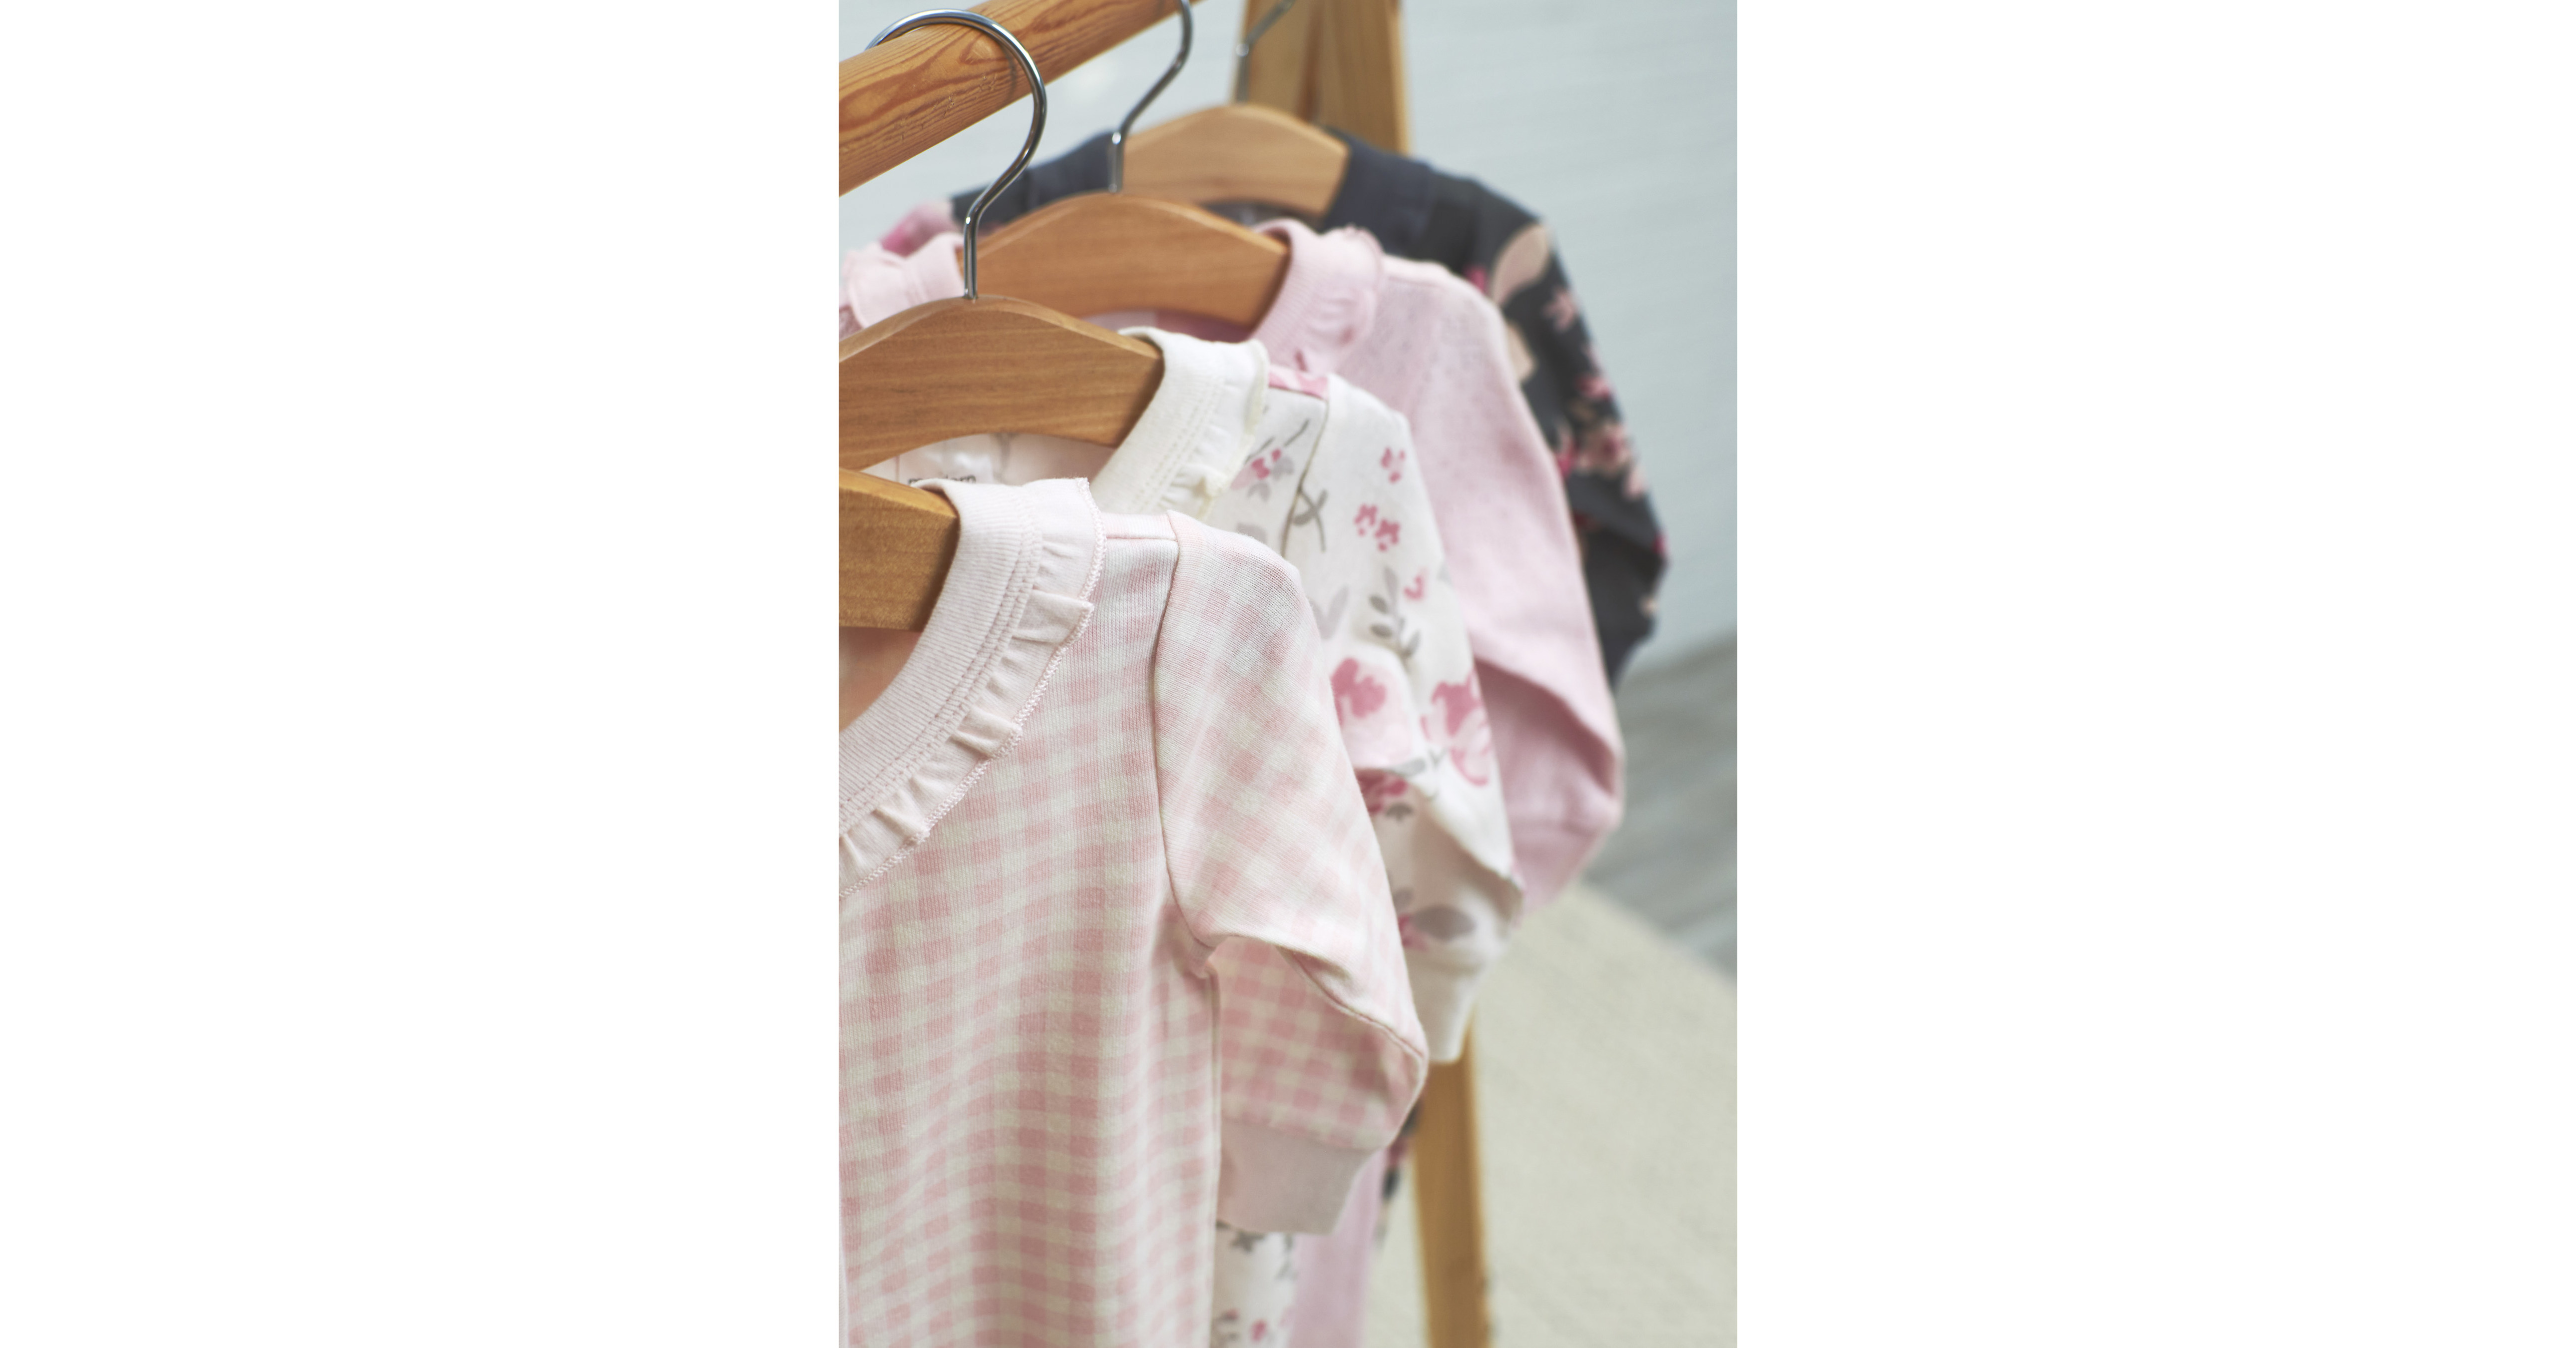 Gerber Childrenswear Debuts Expanded modern moments™ Line of Stylish ...